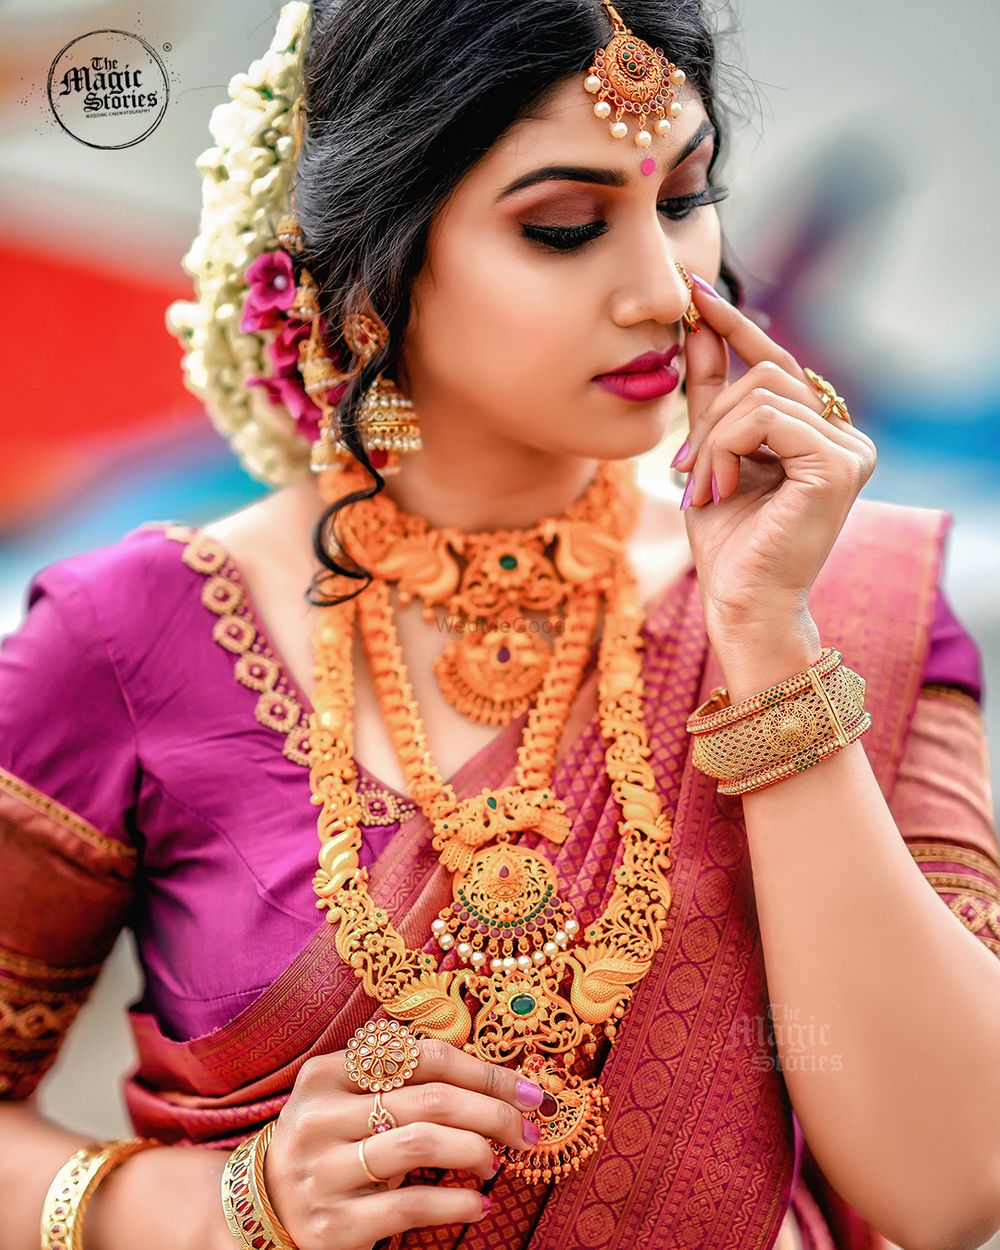 Photo From Hindu Bride - By The Magic Stories